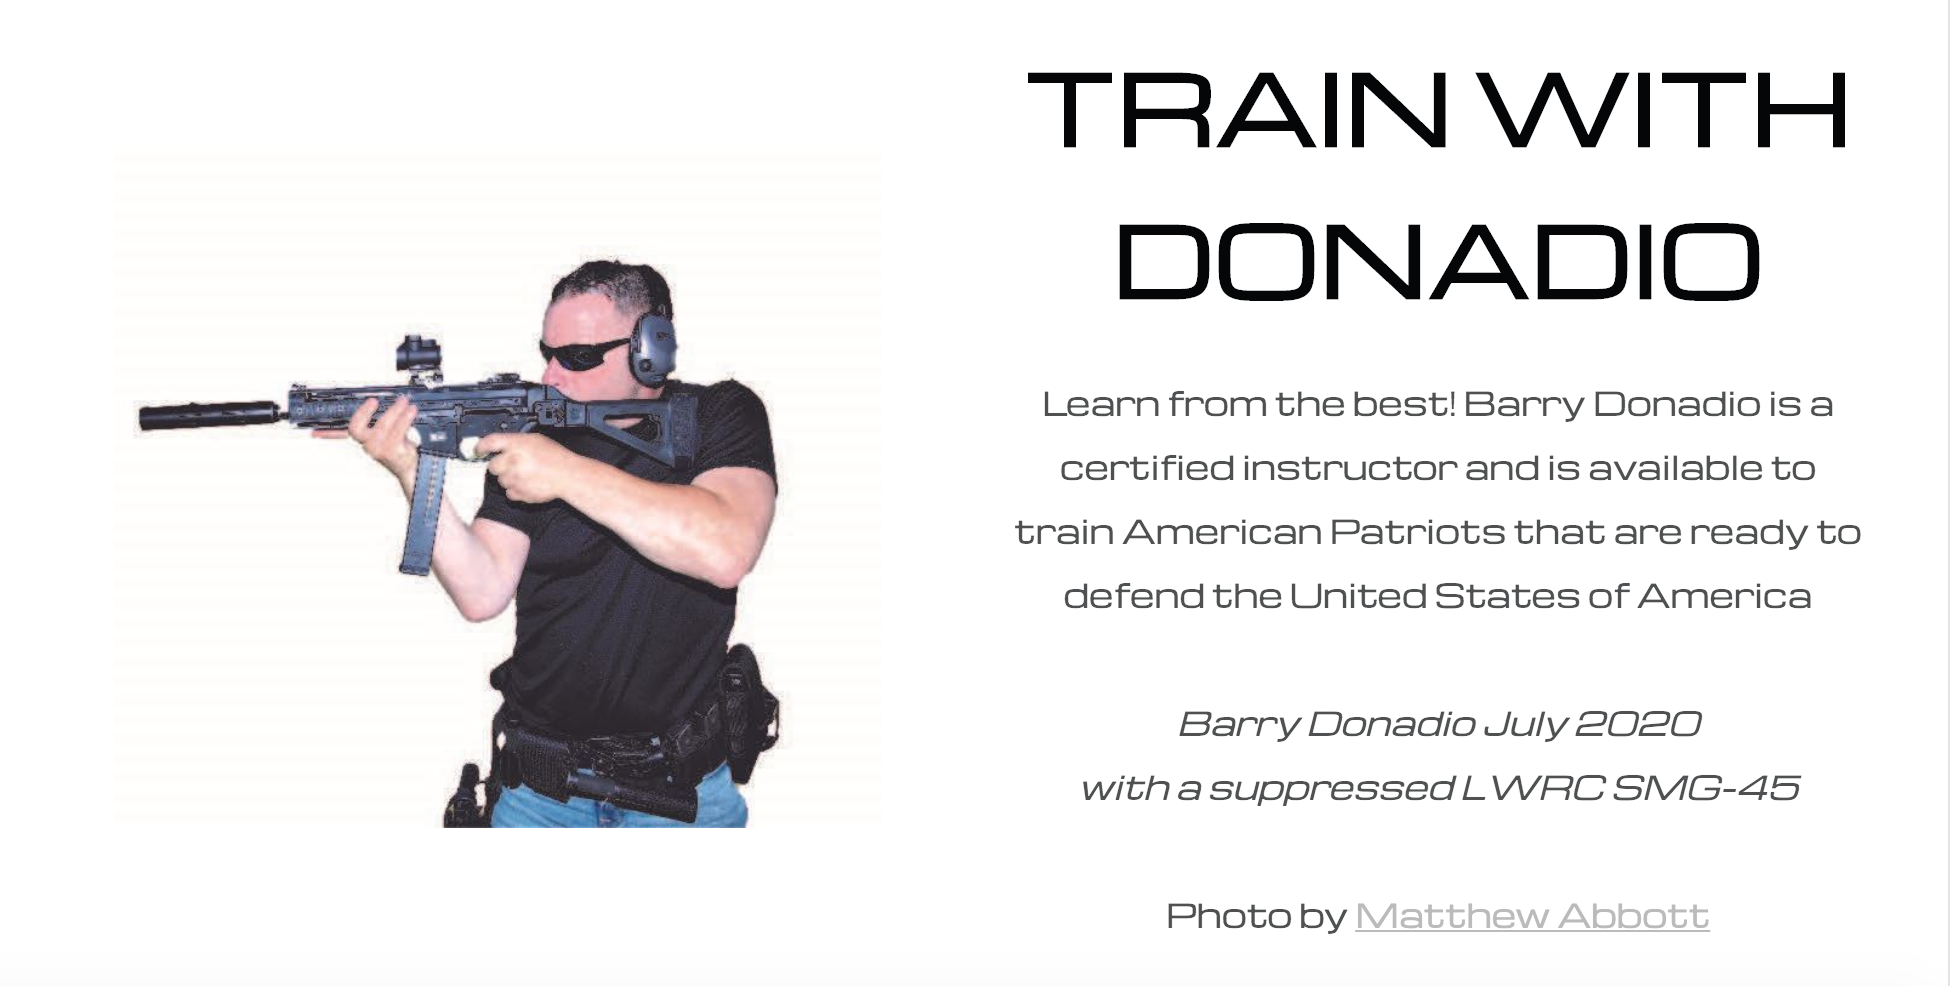 TRAIN WITH BARRY DONADIO Public Security LLC August 2020